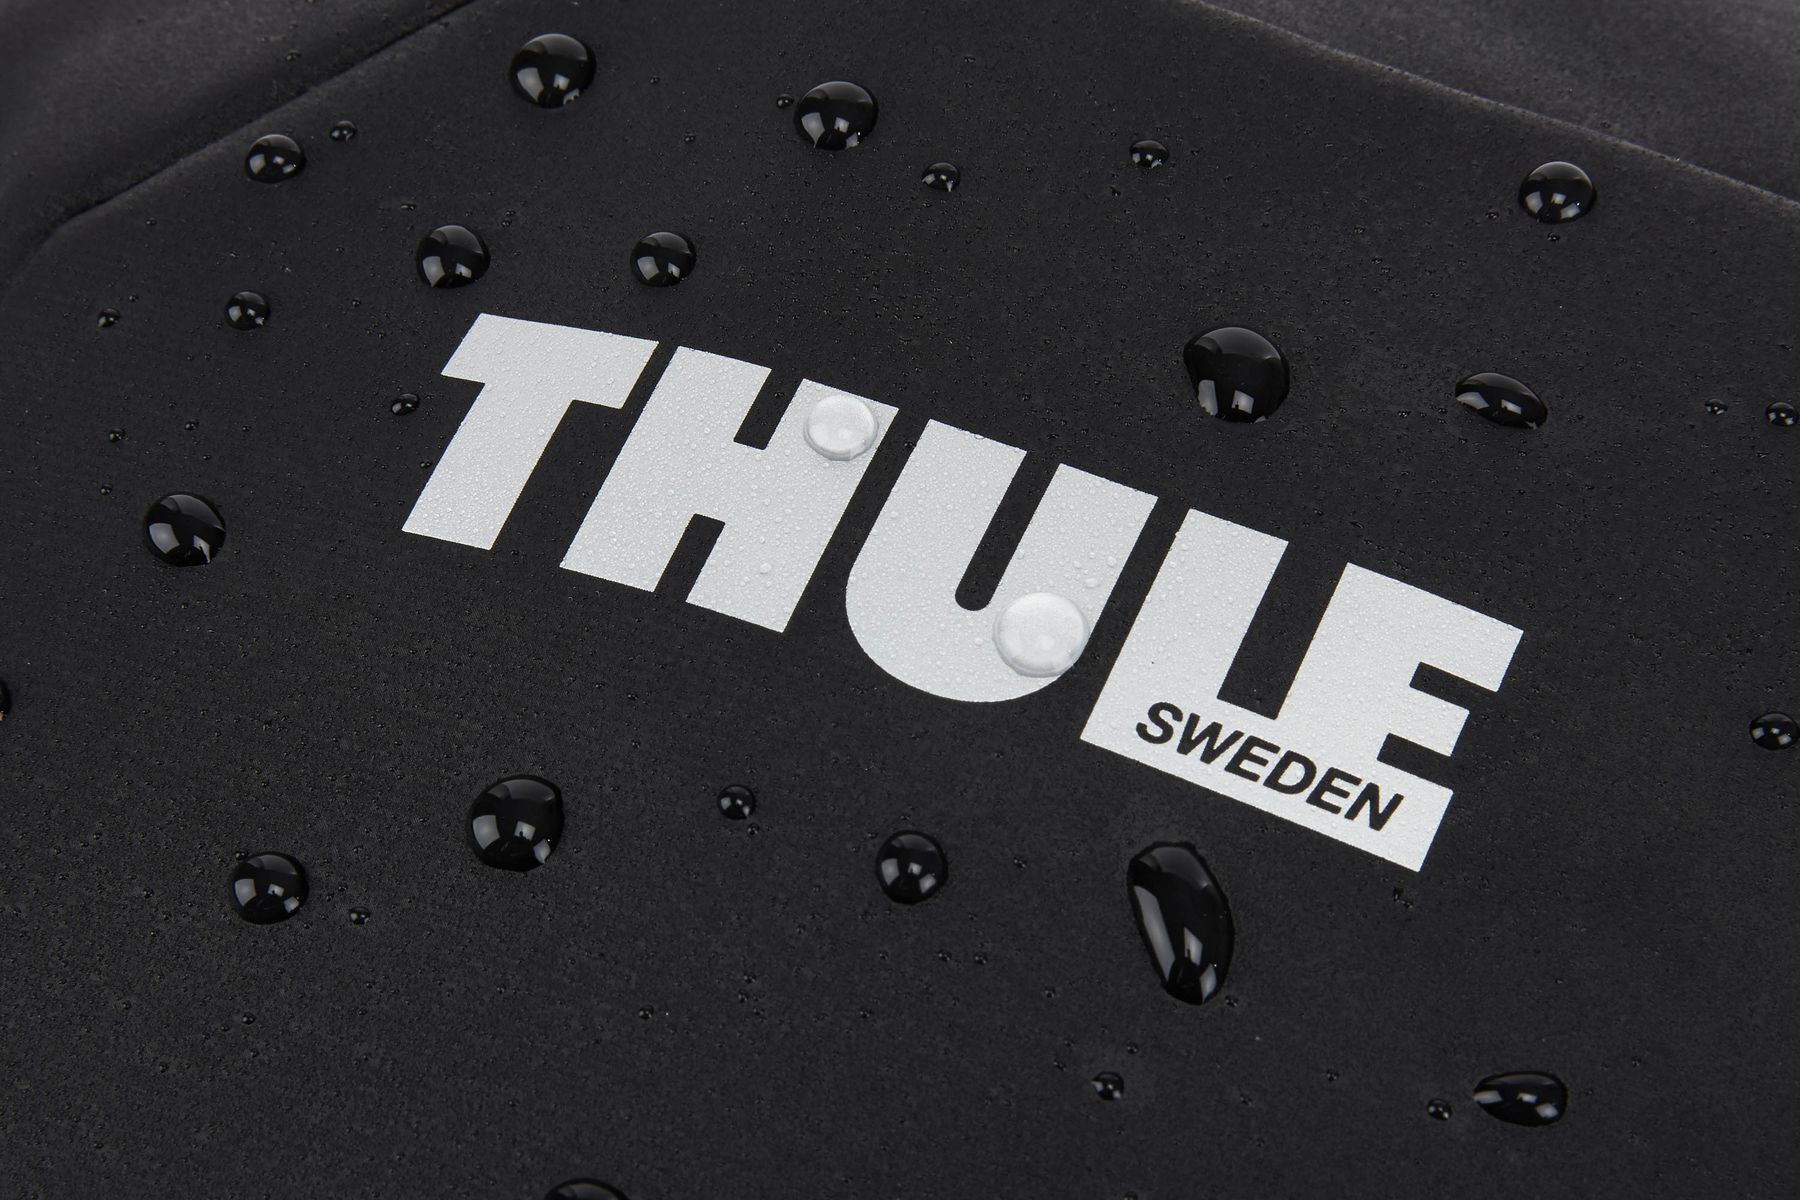 Thule Chasm Carry On